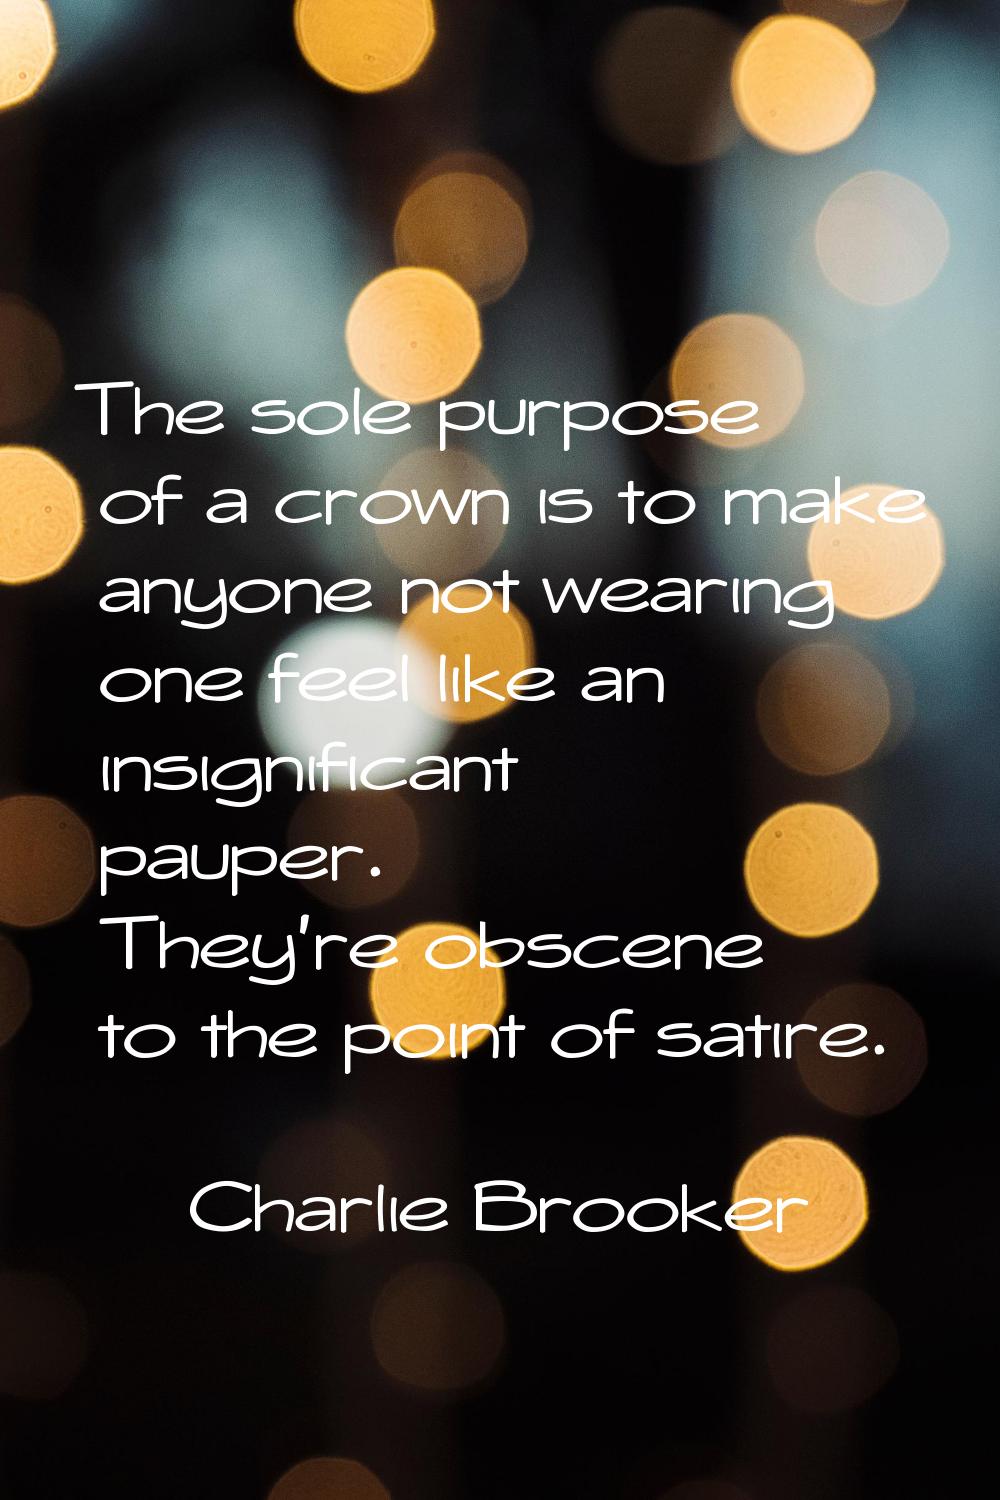 The sole purpose of a crown is to make anyone not wearing one feel like an insignificant pauper. Th